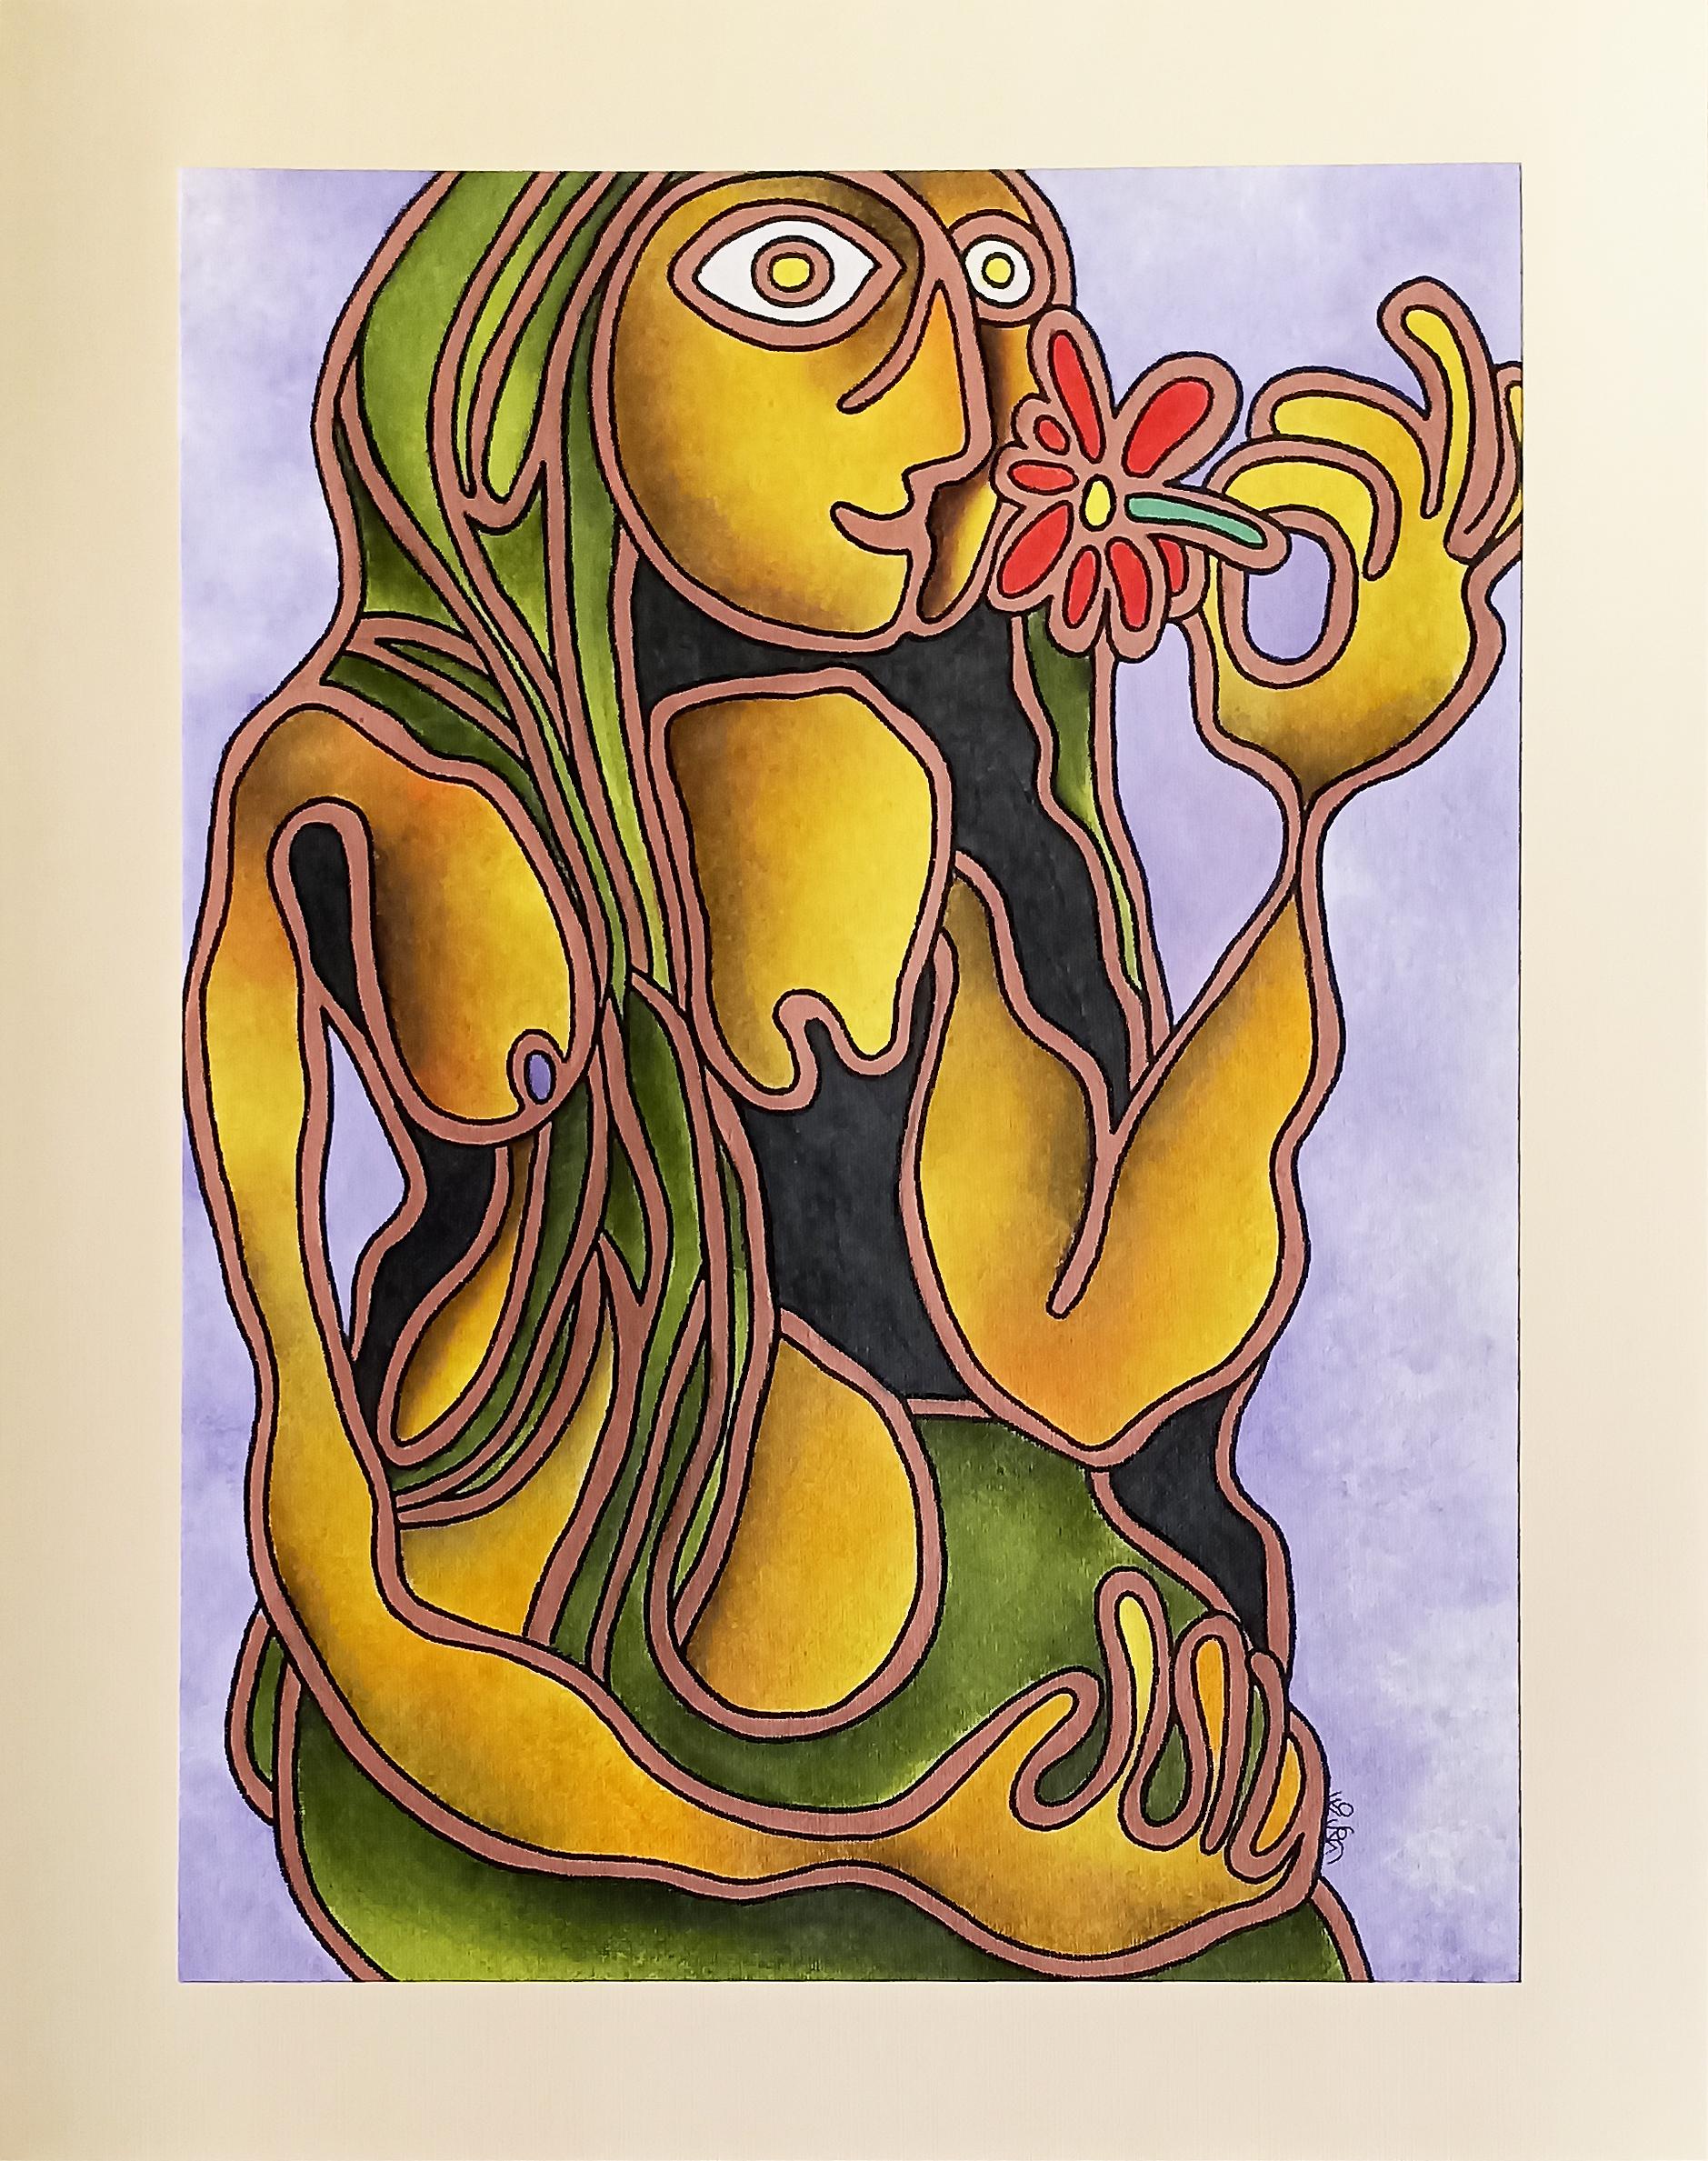 Prokash Karmakar Figurative Painting - Woman with the Flower, Acrylic on Paper by Modern Artist "In Stock"